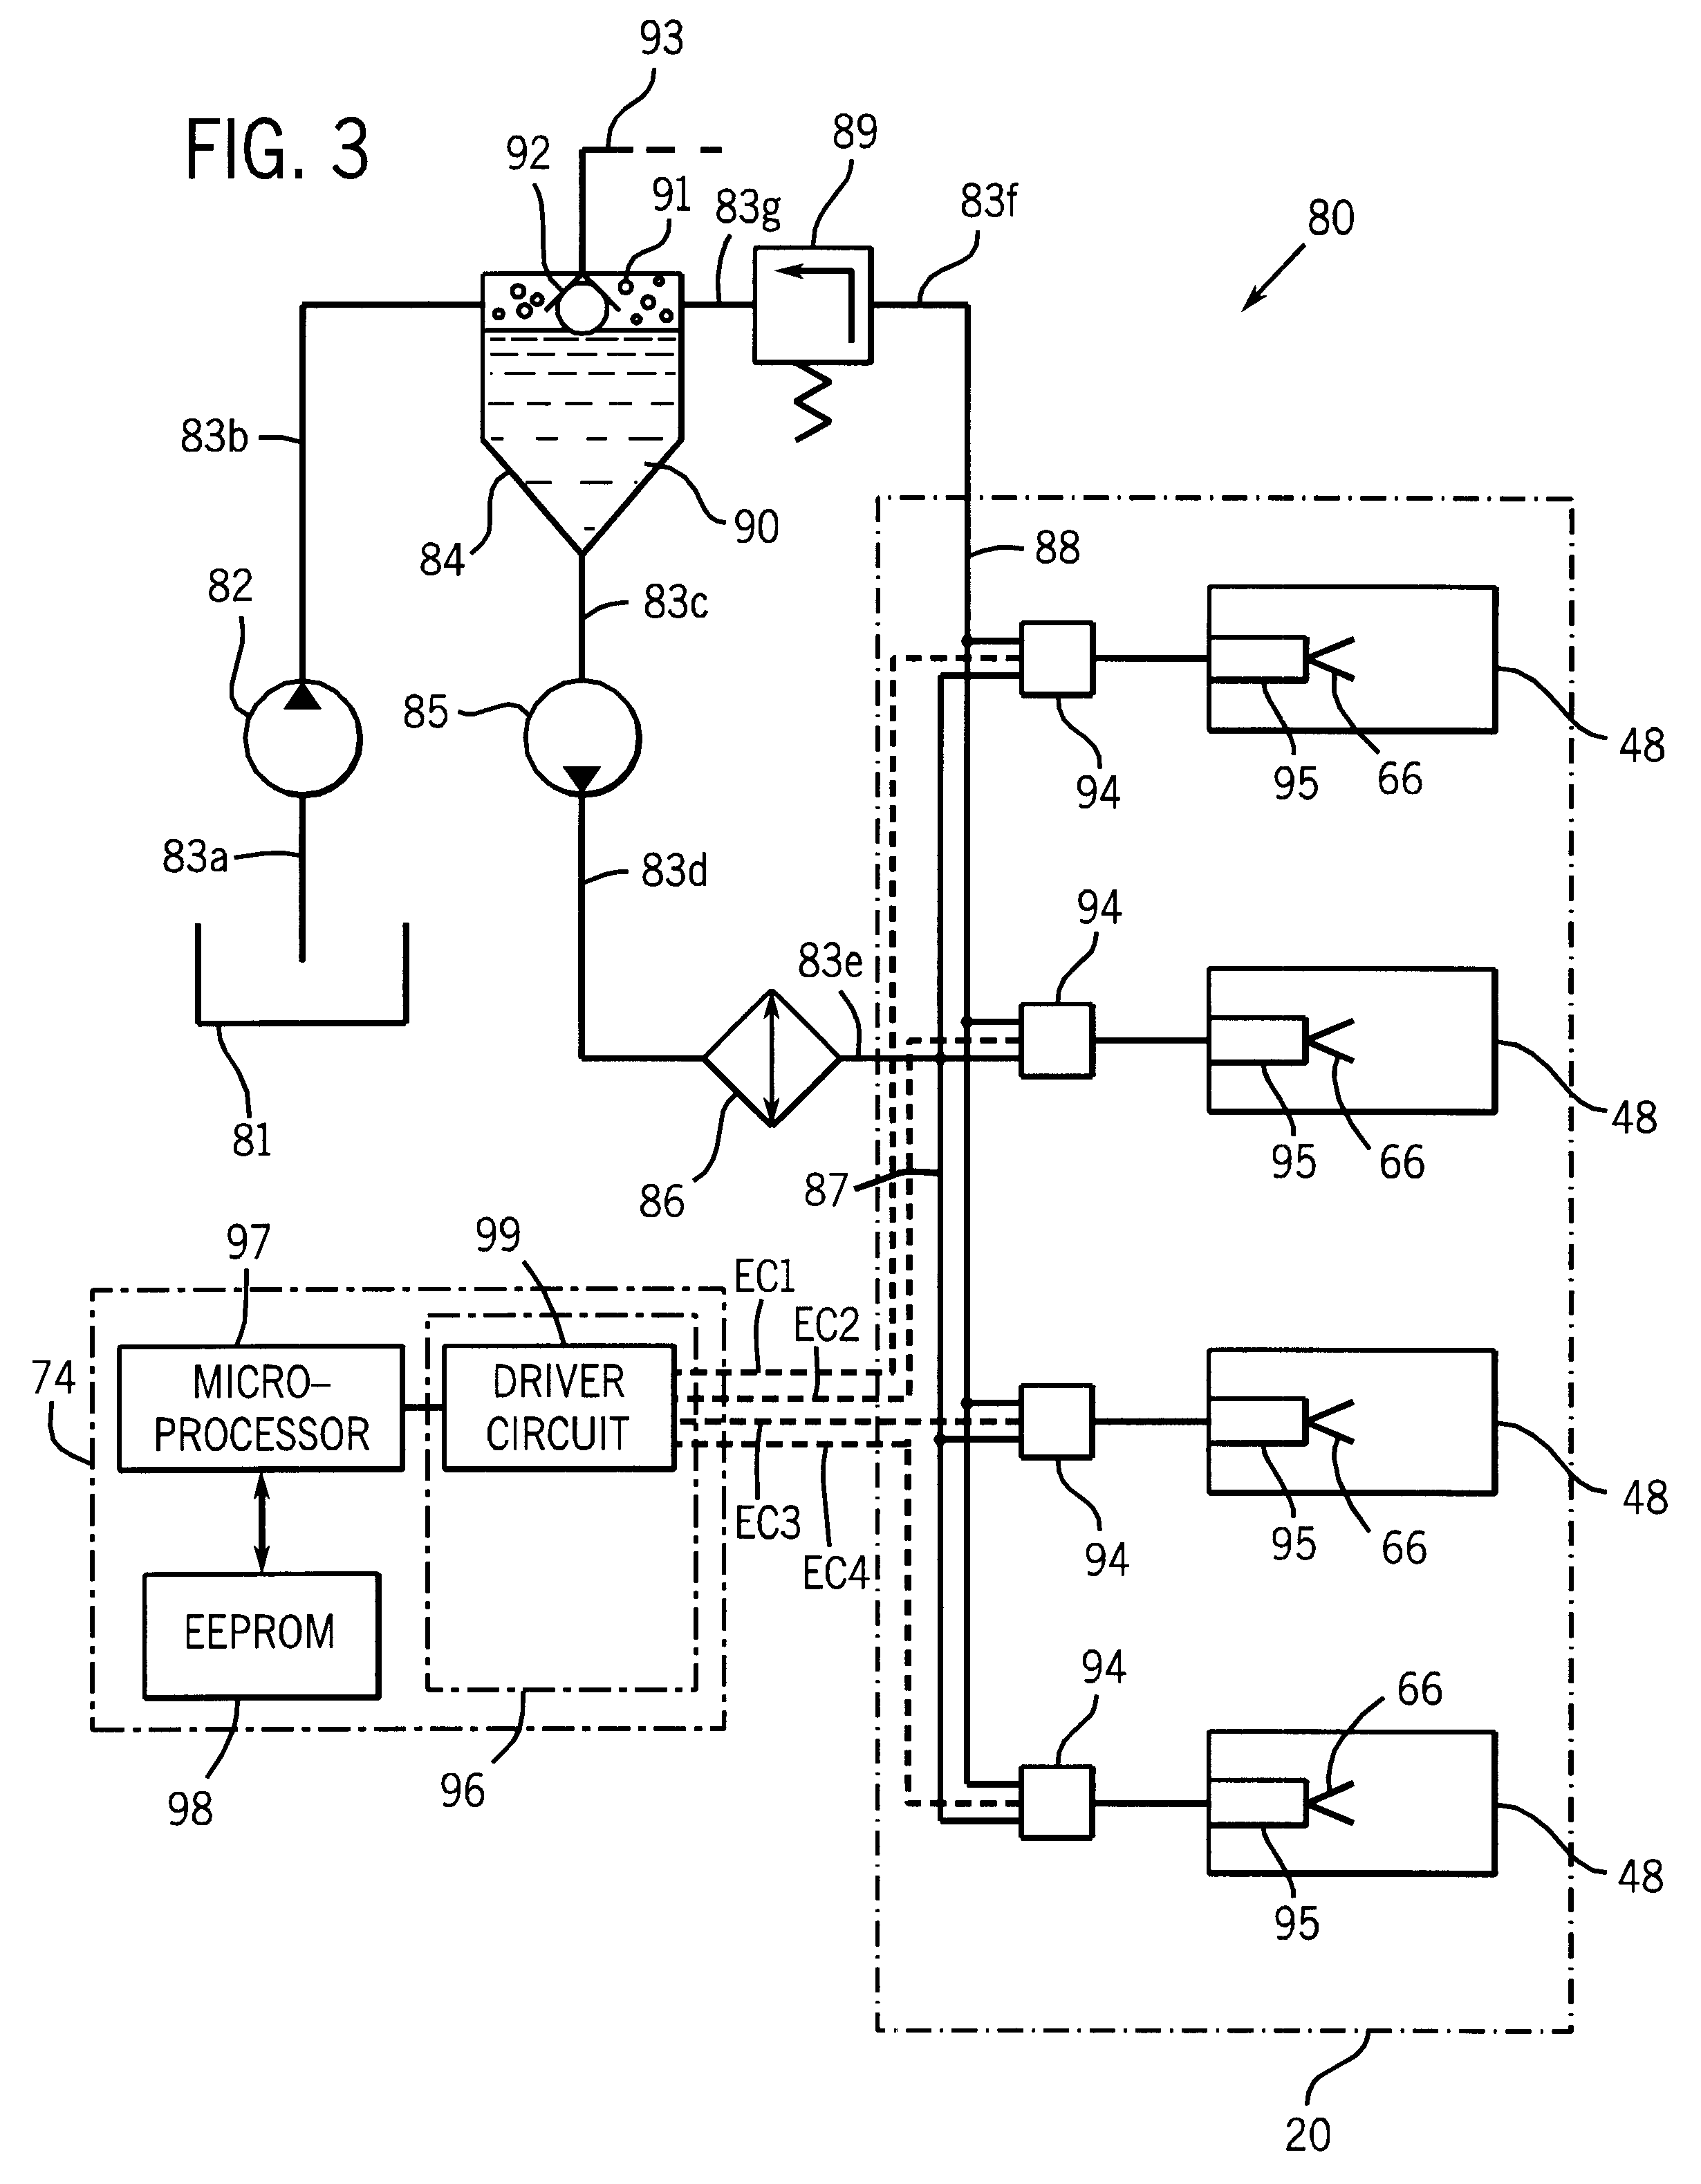 Multi-port fuel injection nozzle and system and method incorporating same